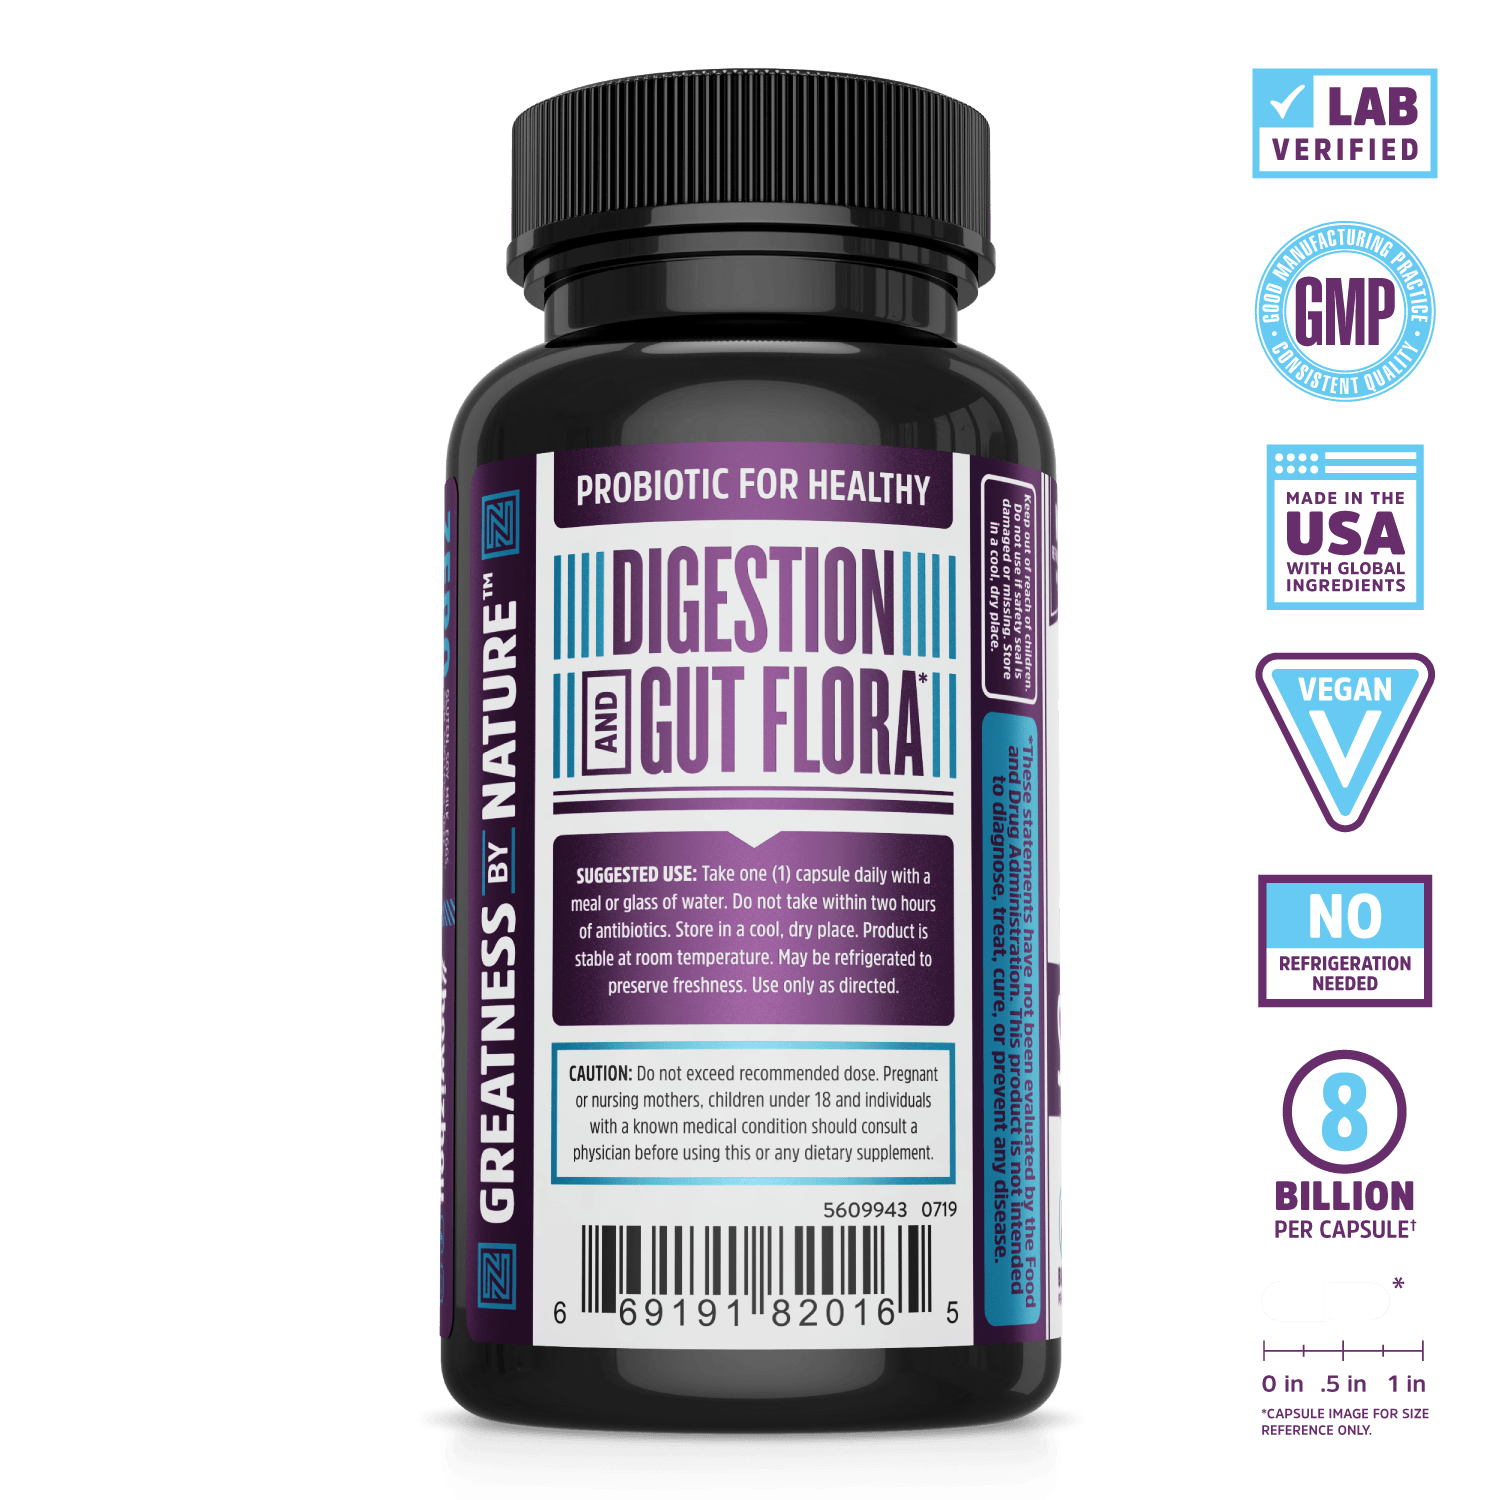 Zhou Nutrition S. Boulardii Gut Health Supplement.  Lab verified, good manufacturing practices, made in the USA with global ingredients, vegan, no refrigeration needed, 8 billion per capsule